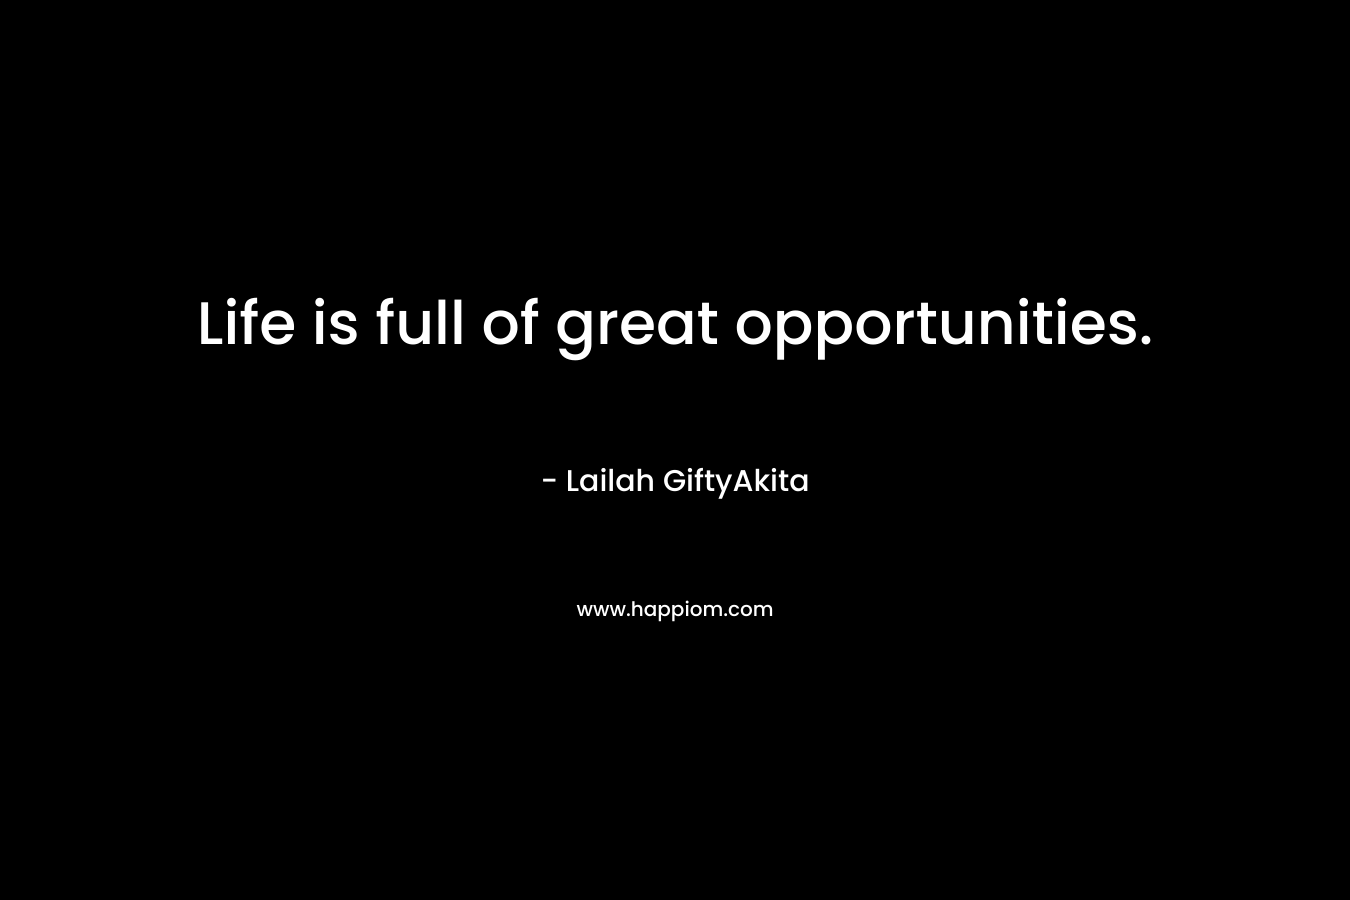 Life is full of great opportunities.